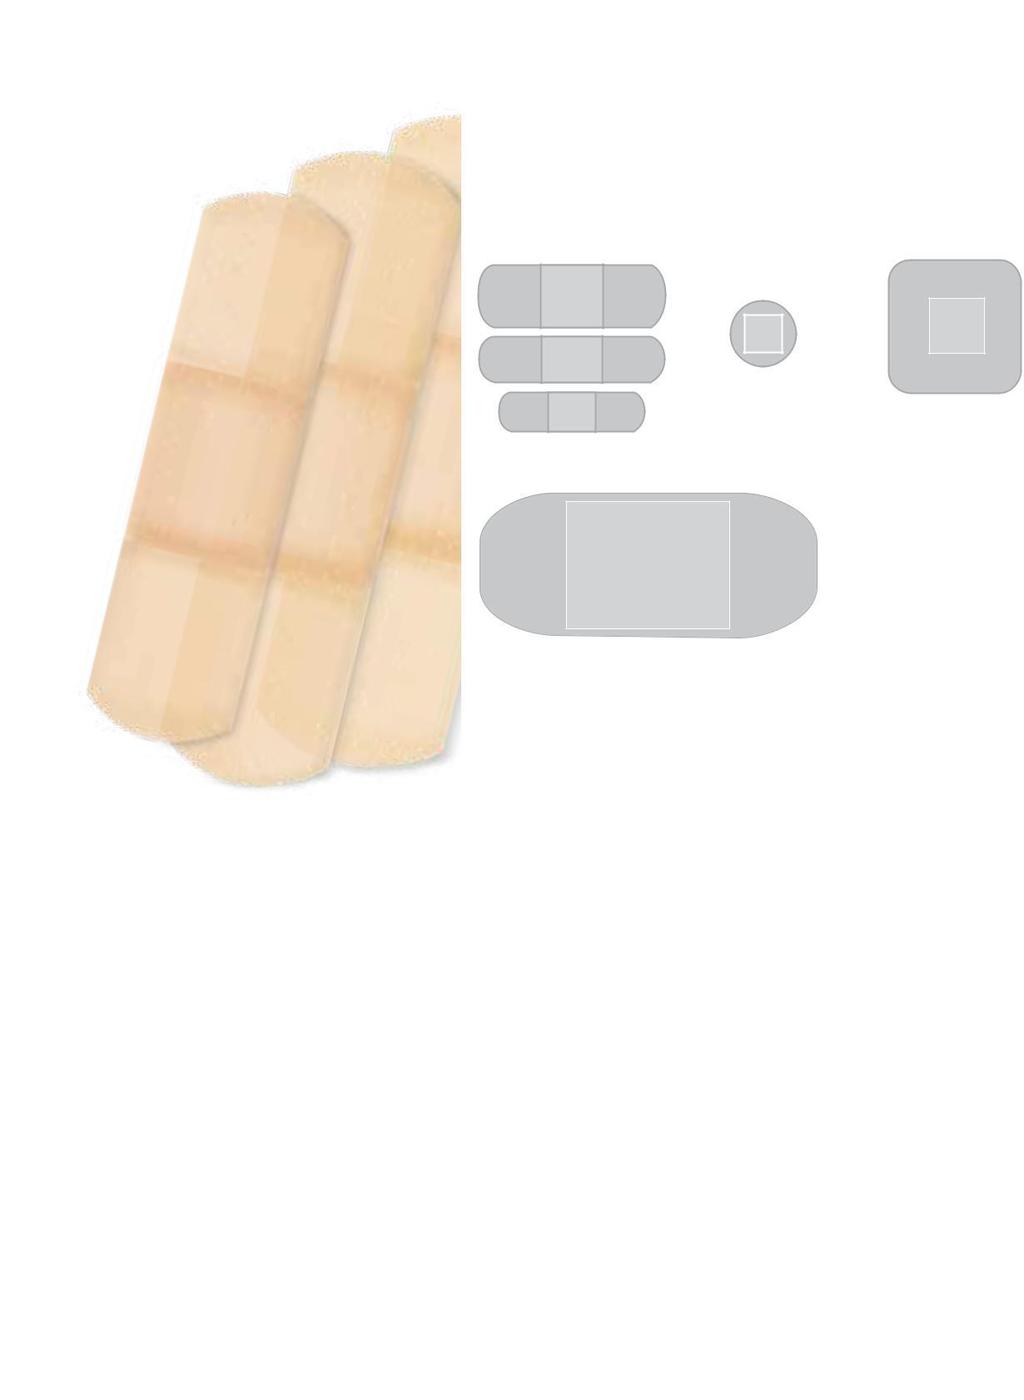 MHMS, INC. Sheer Bandages Sheer bandages have a natural appearance will allows wounds to be hidden. Superior, highly absorbent non-stick pad protects the wound.